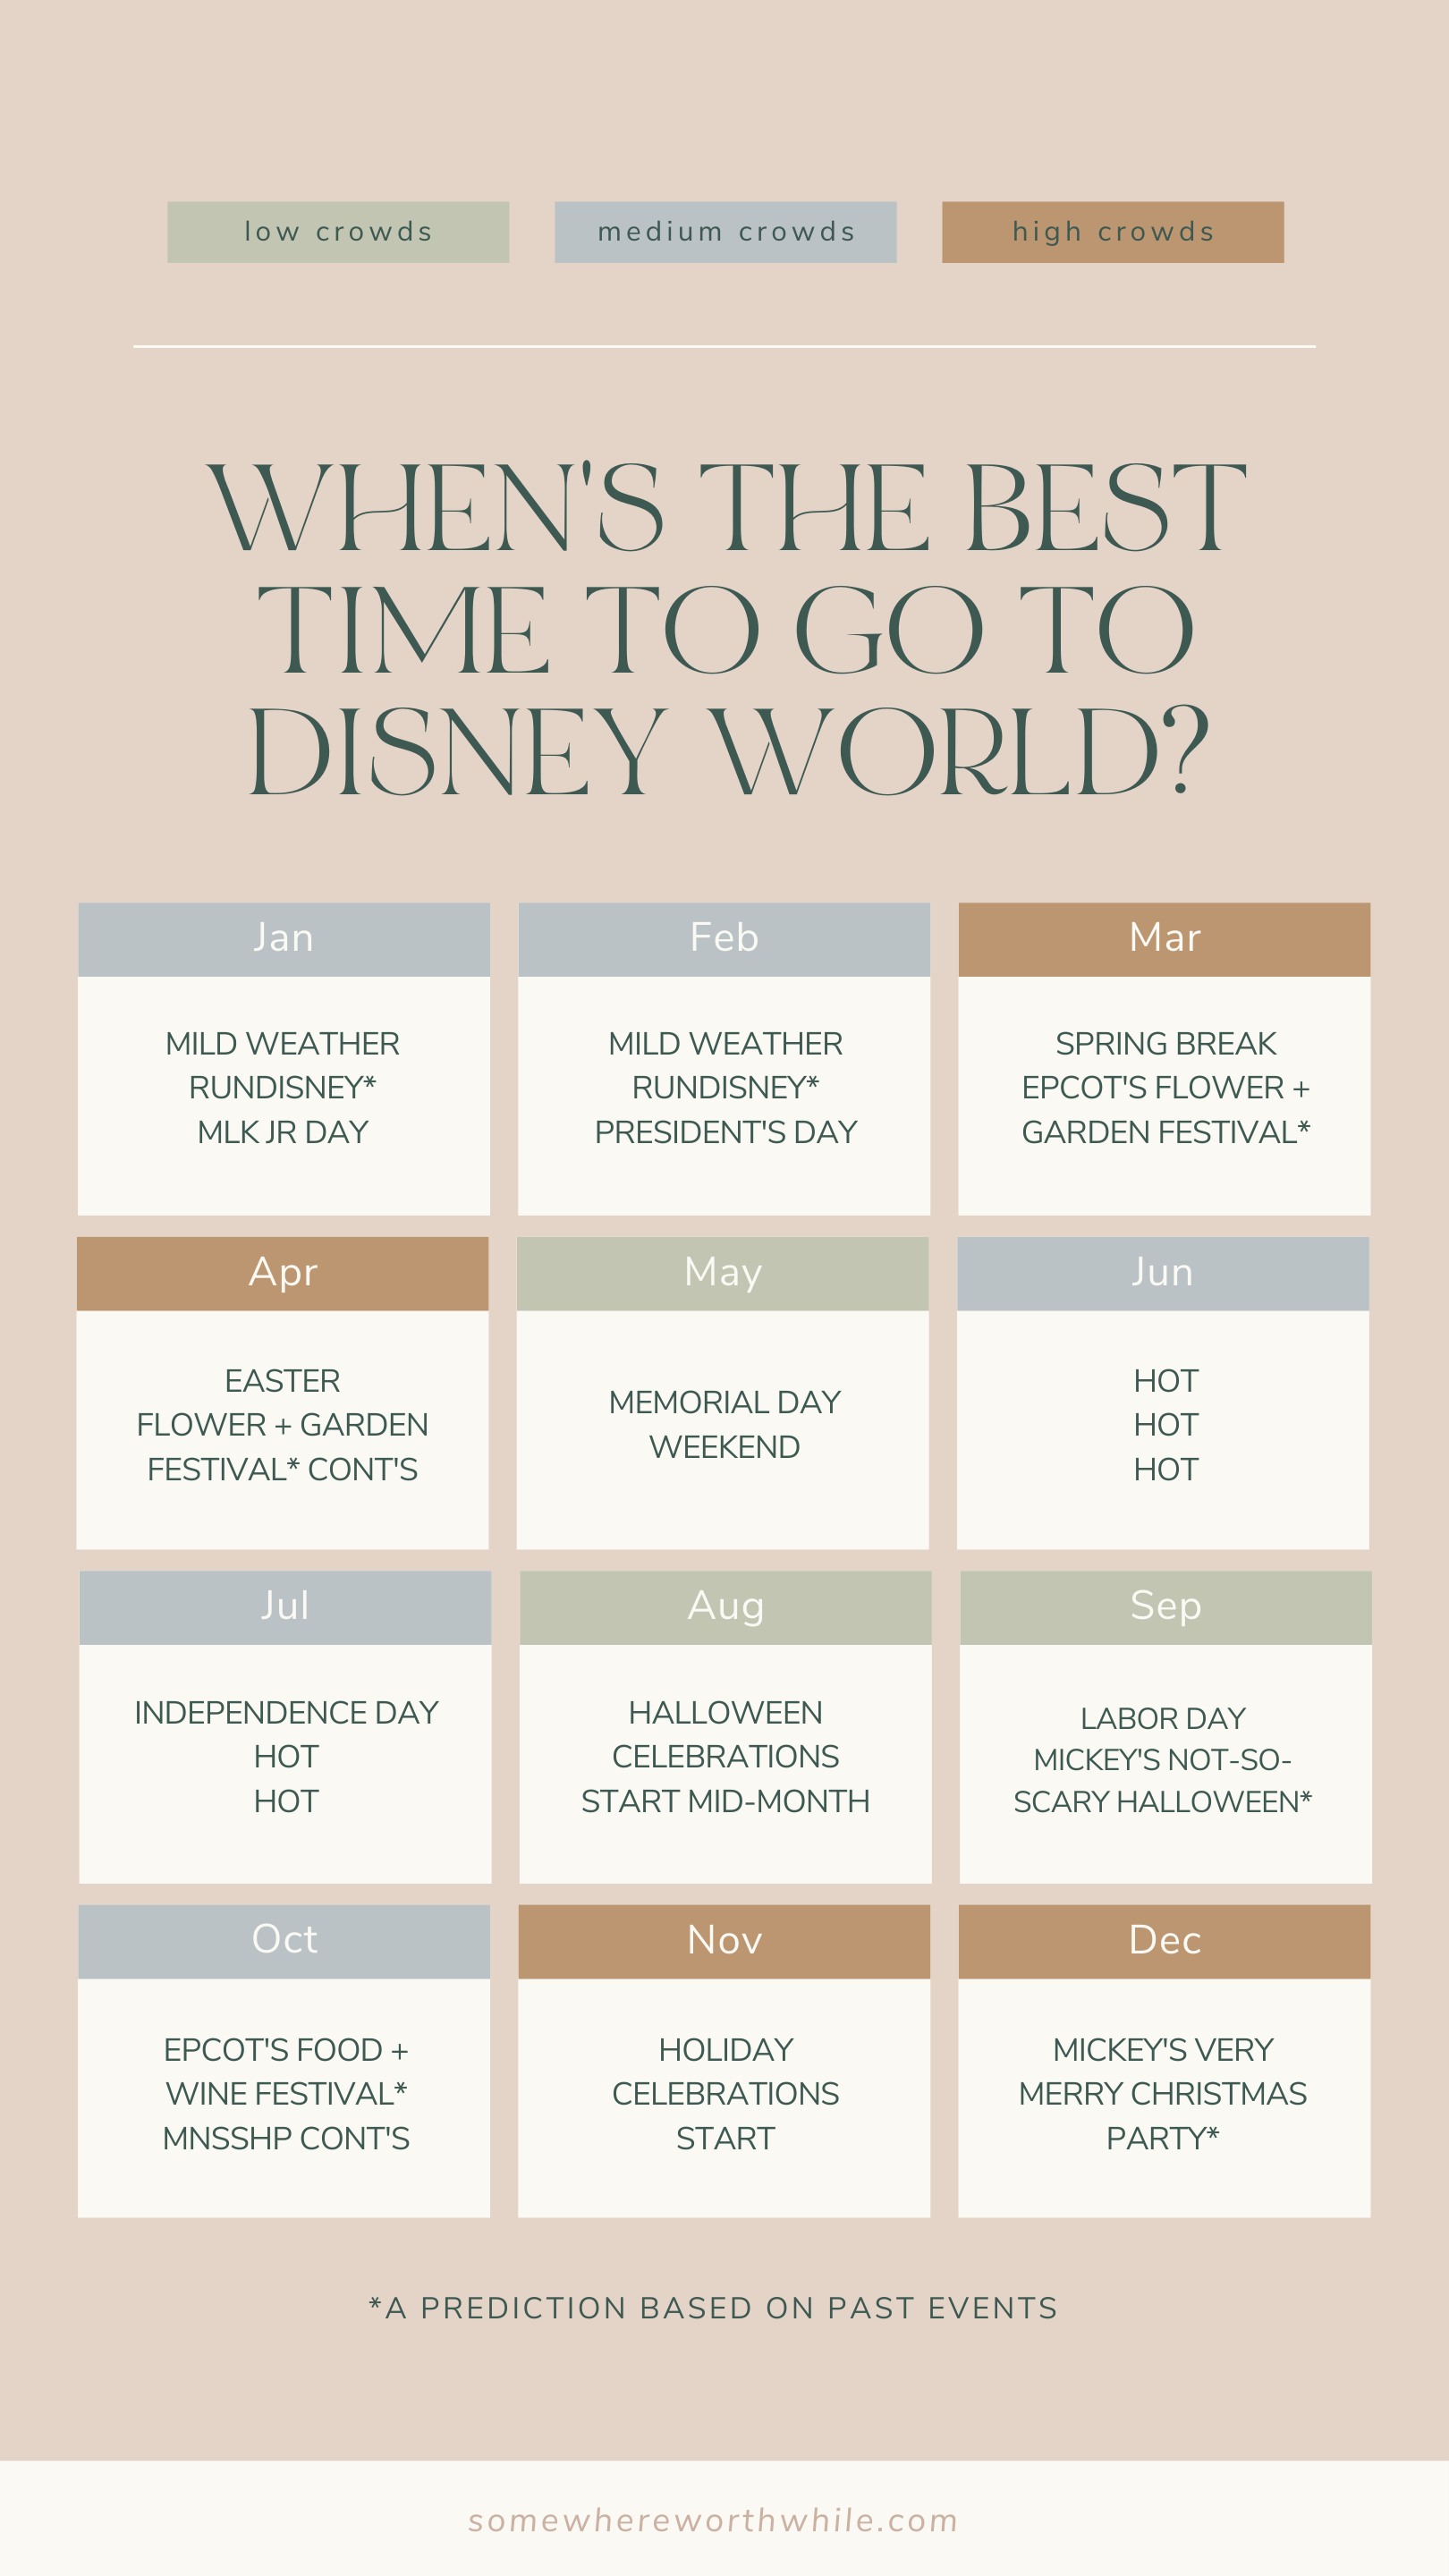 Disney Event Calendar 2022 When's The Best Time To Visit Disney World? | Somewhere Worthwhile Blog